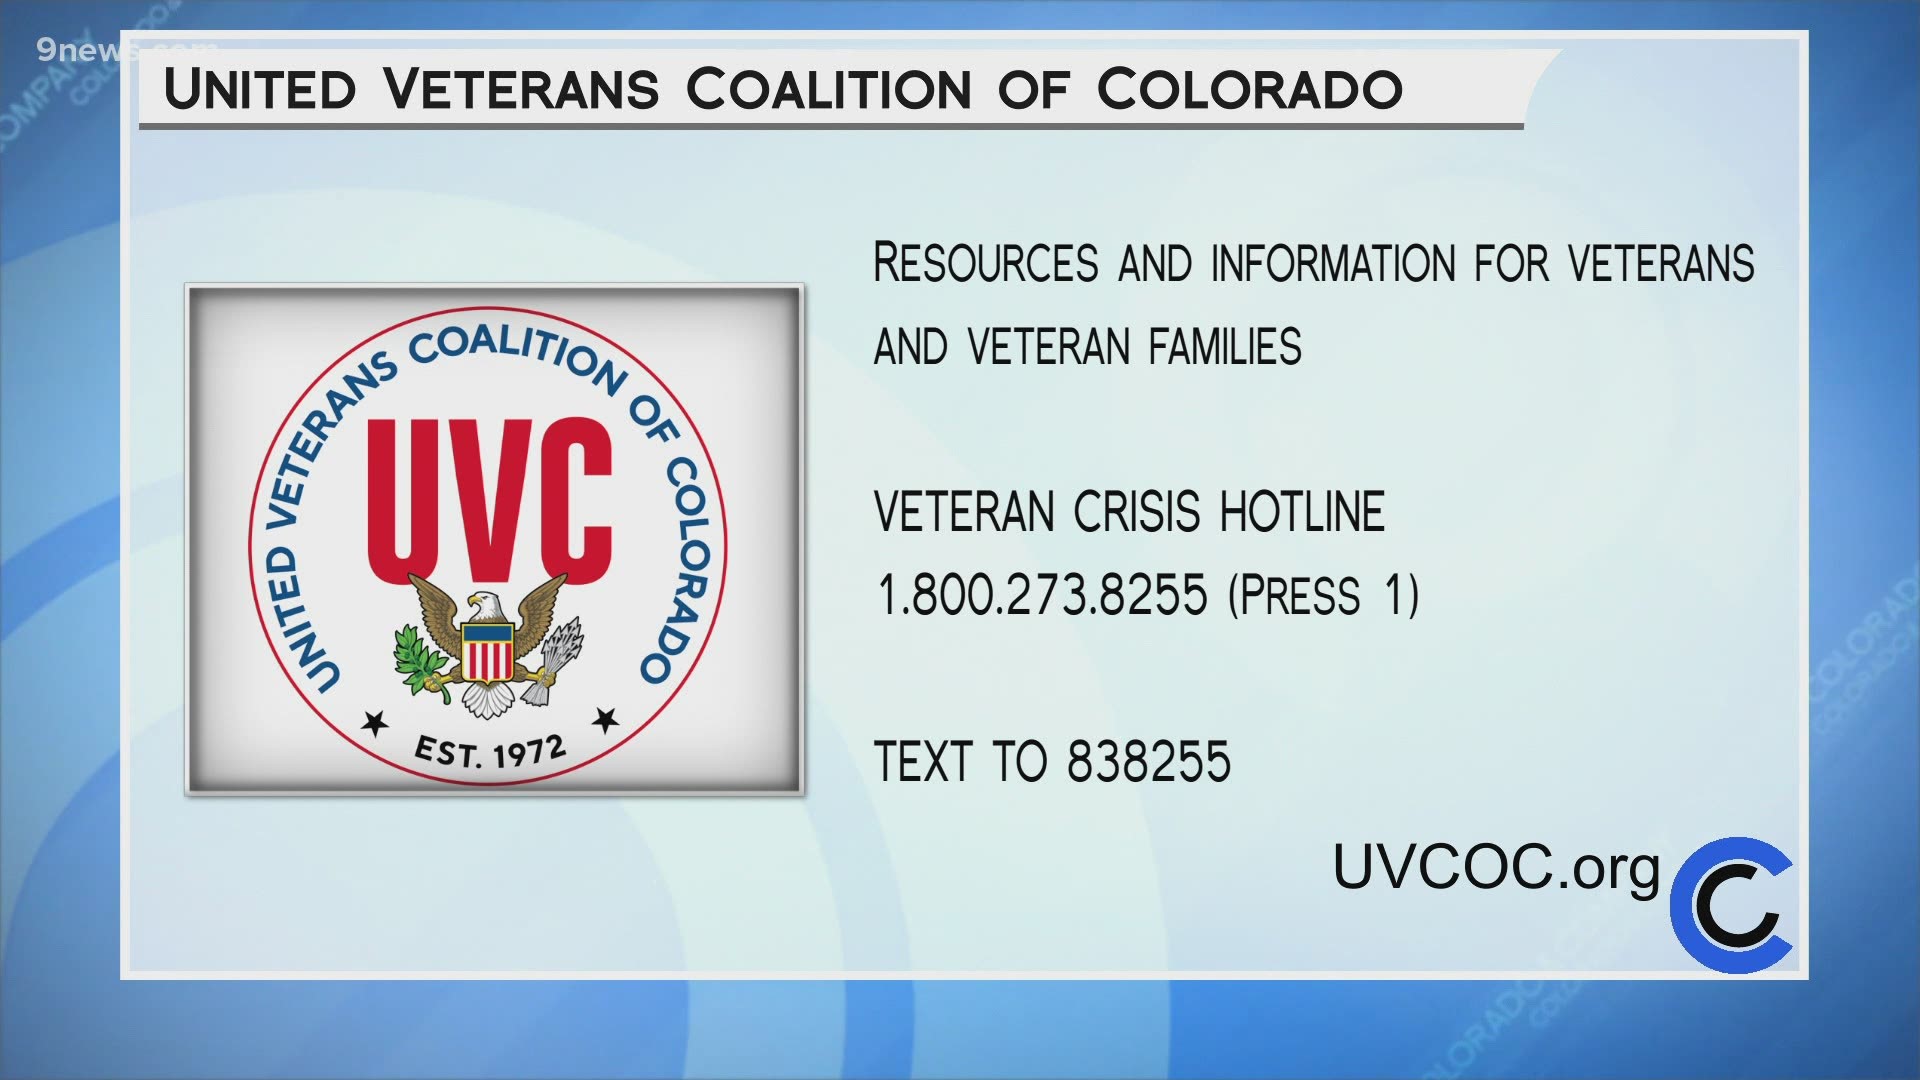 Learn more about the United Veterans Coalition of Colorado and how they help Colorado Veterans and their families by visiting UVCoC.org.